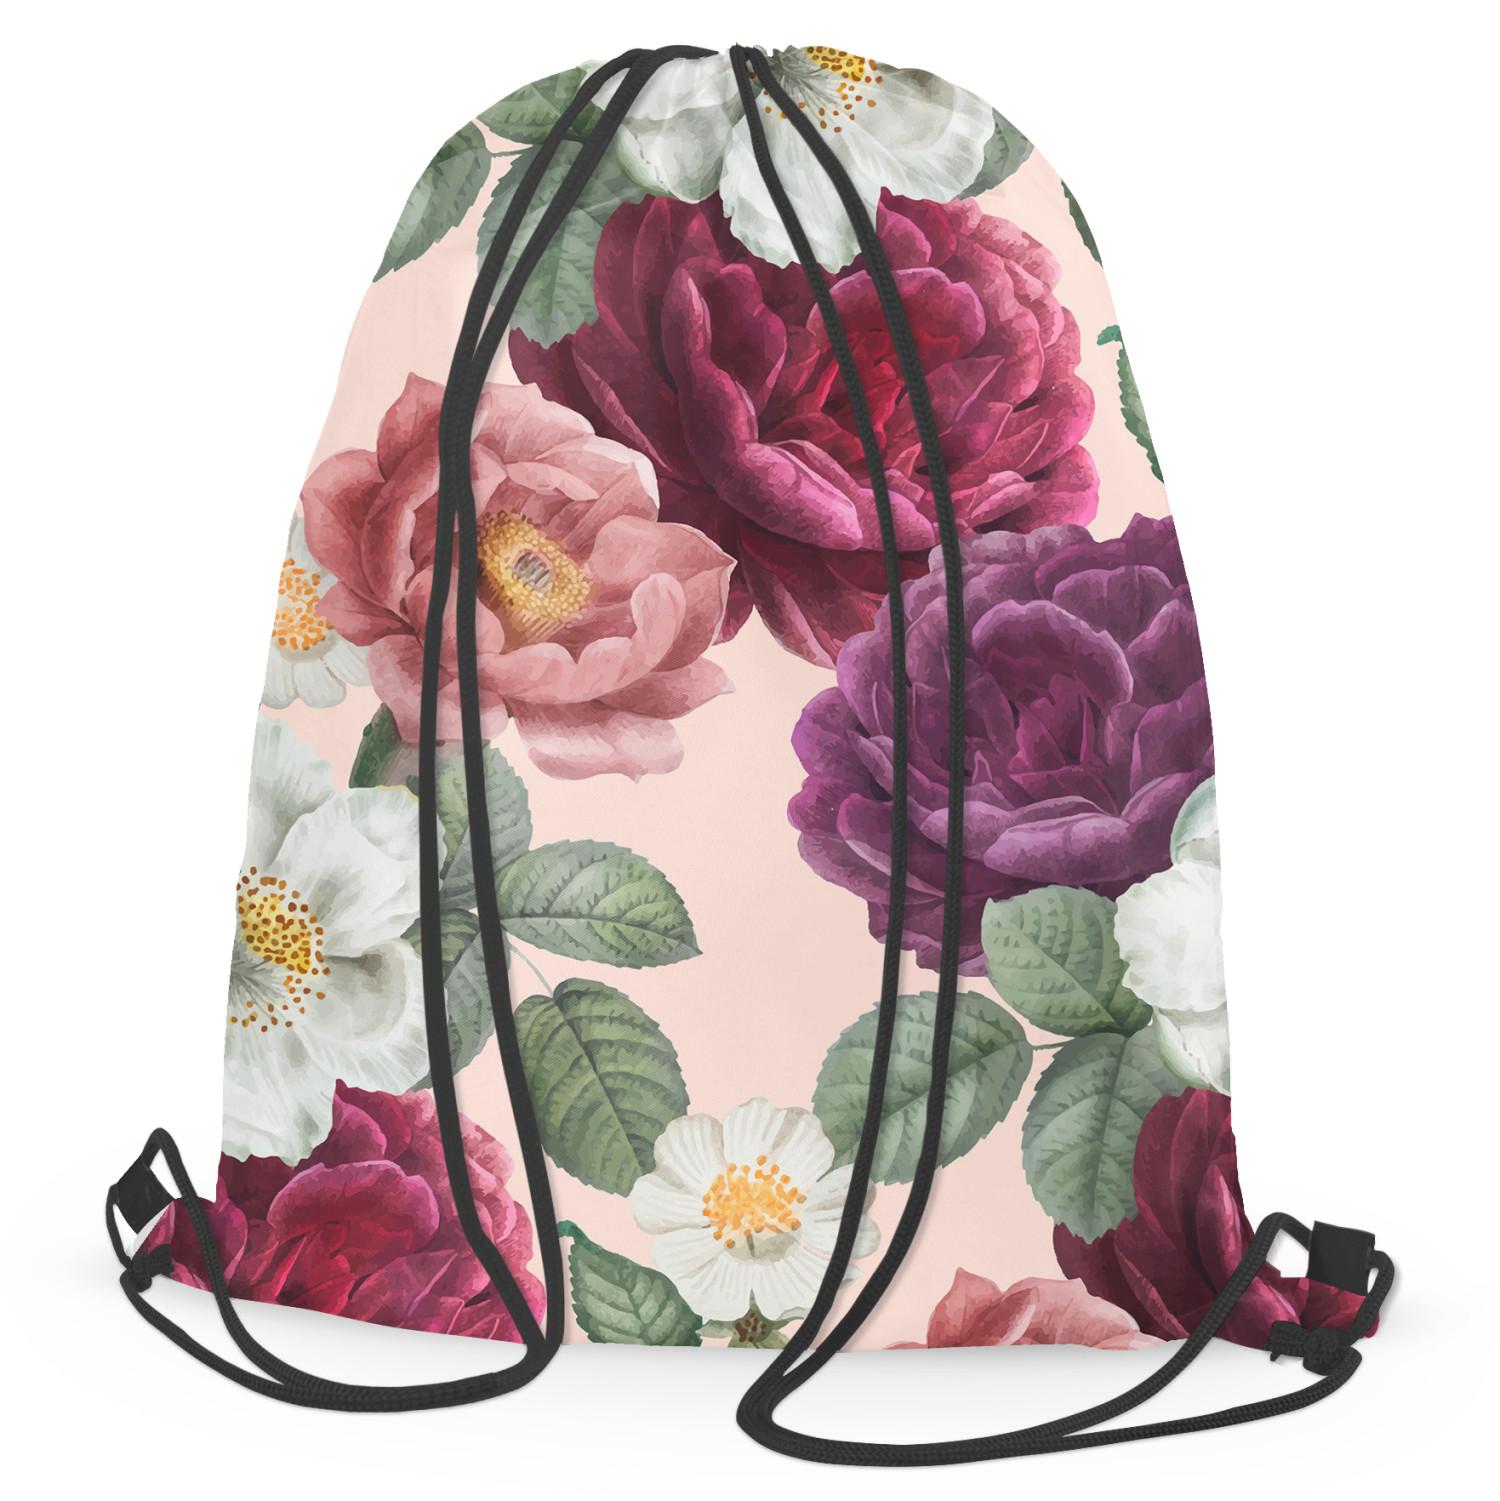 Mochila Peonies in bloom - a floral, vintsage style print on peach background